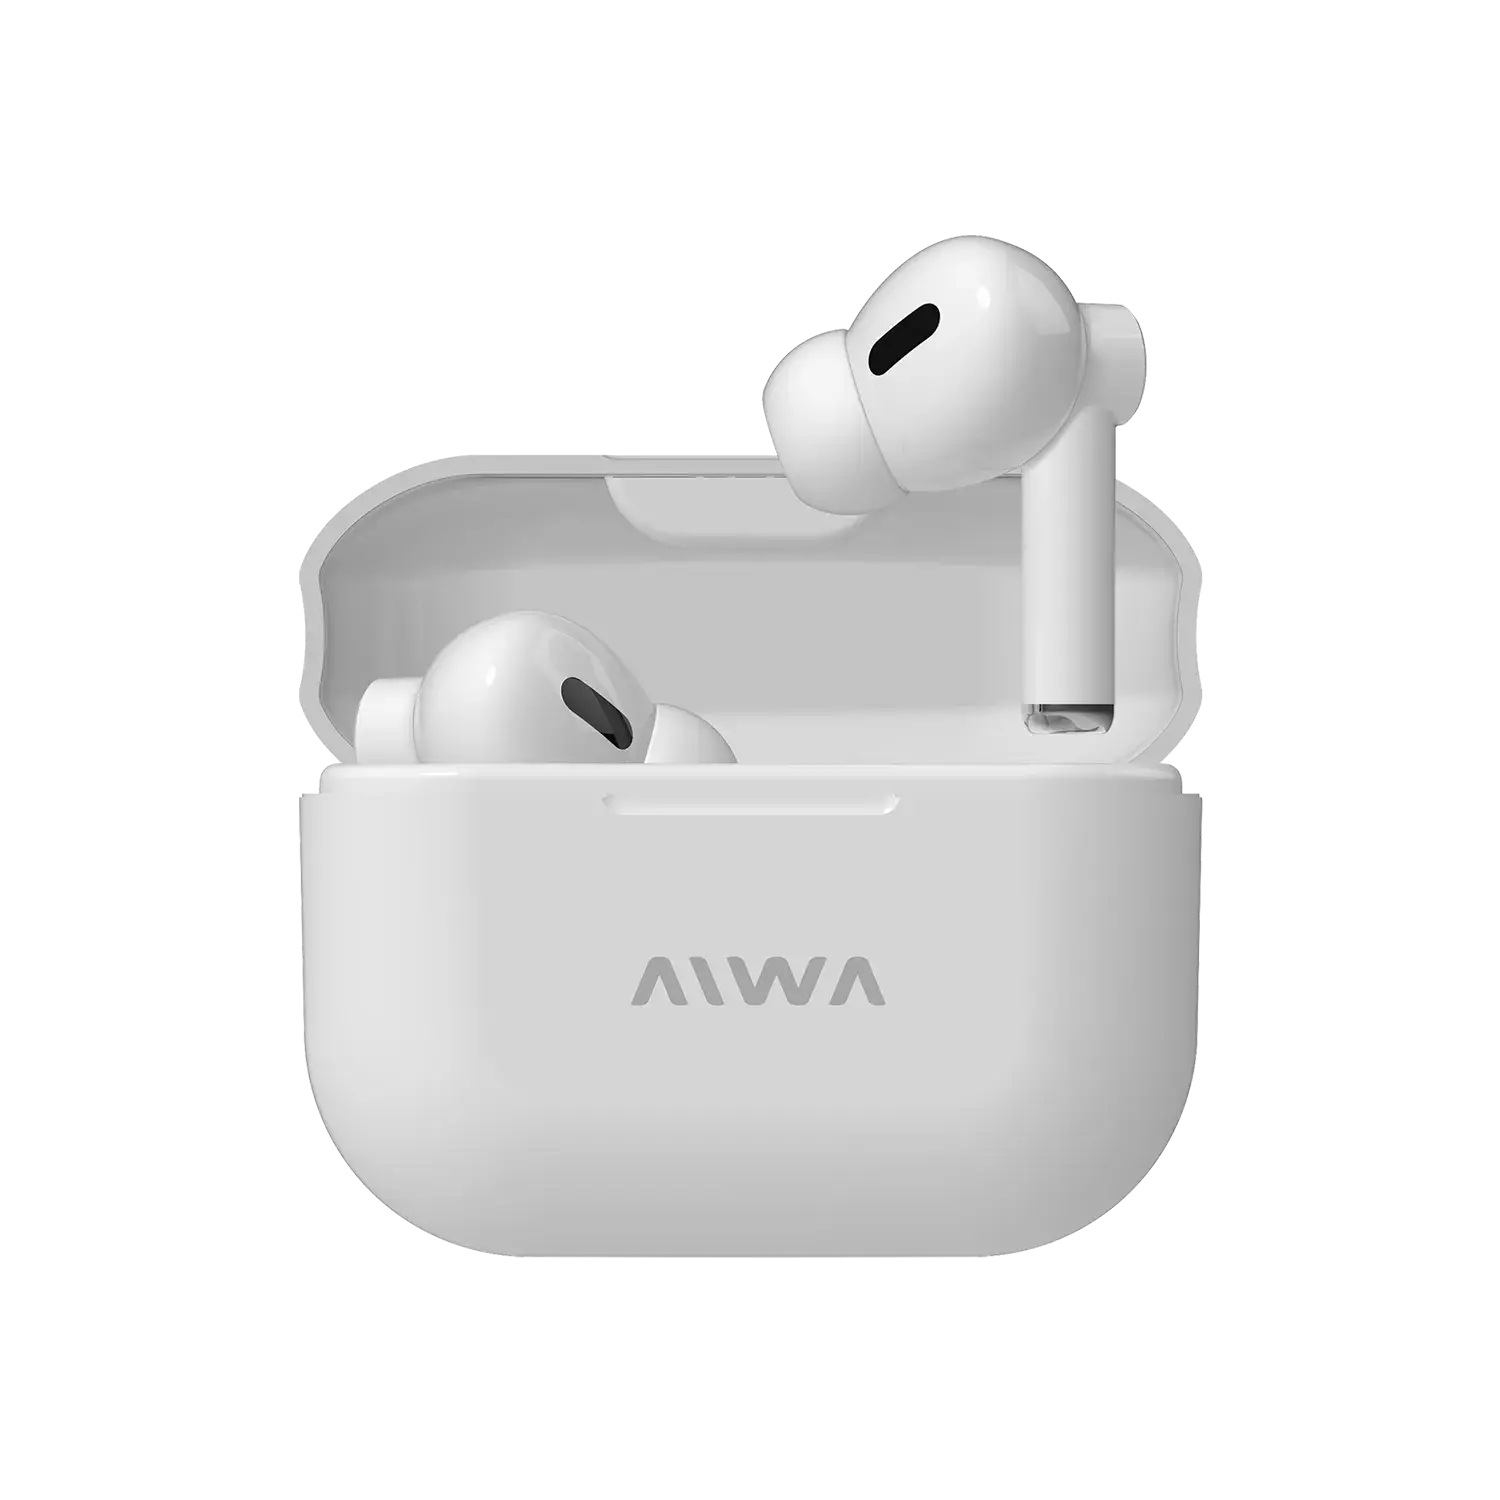 Auriculares In-ear Bluetooth